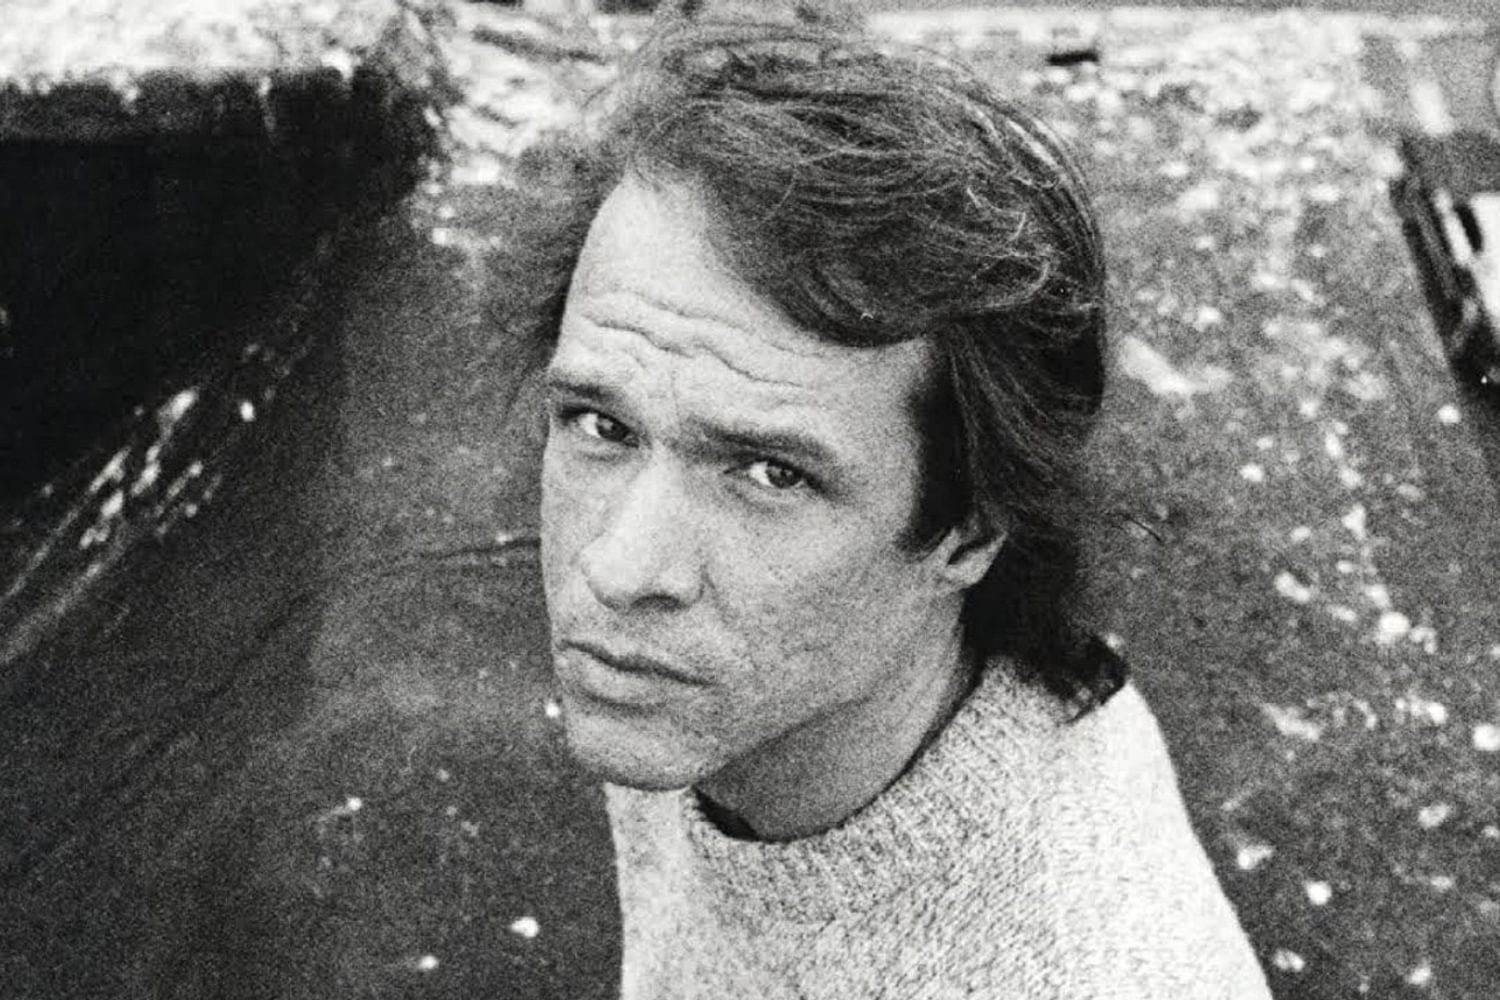 Arthur Russell tribute show to feature Dev Hynes and Arcade Fire’s Richard Reed Parry